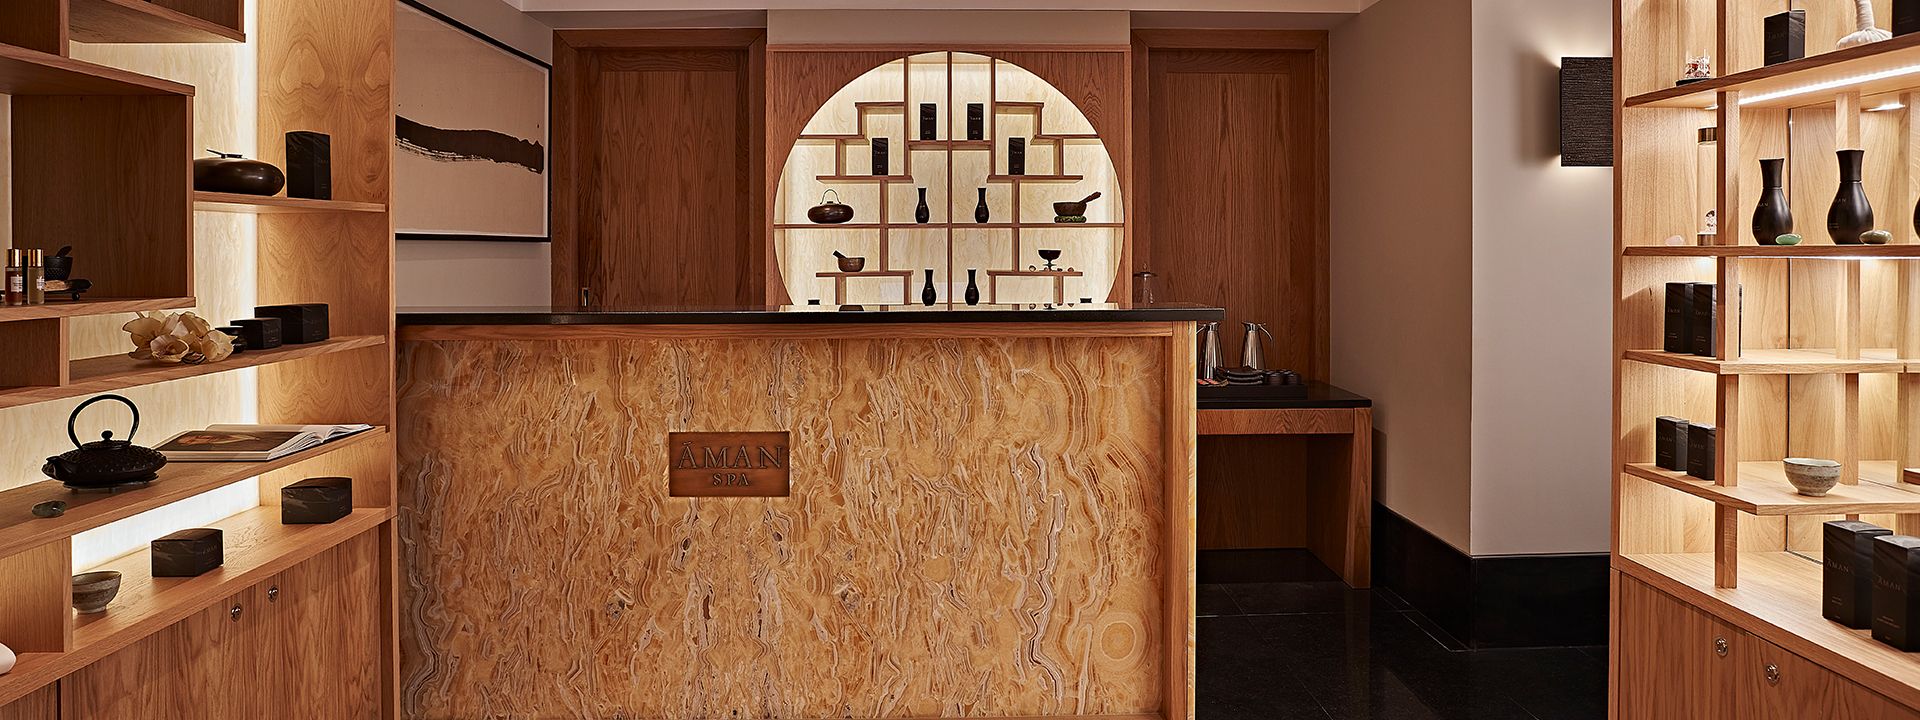 Aman Spa at The Connaught - Spa entrance with counter and cupboards with products on each side of the counter